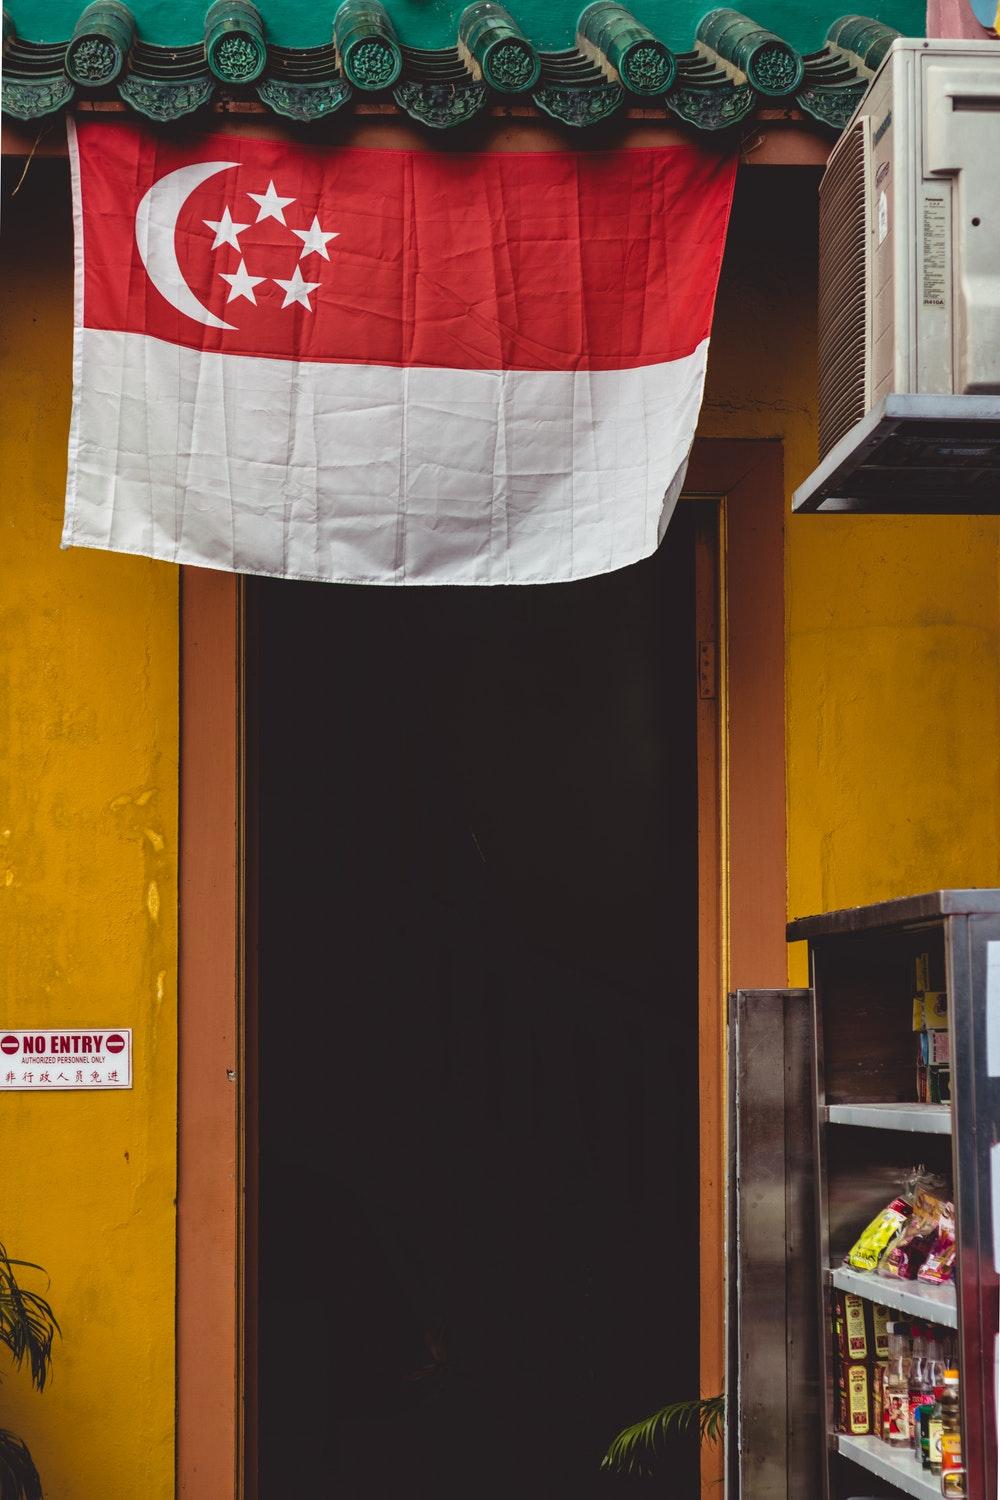 Singapore Flag Picture. Download Free Image